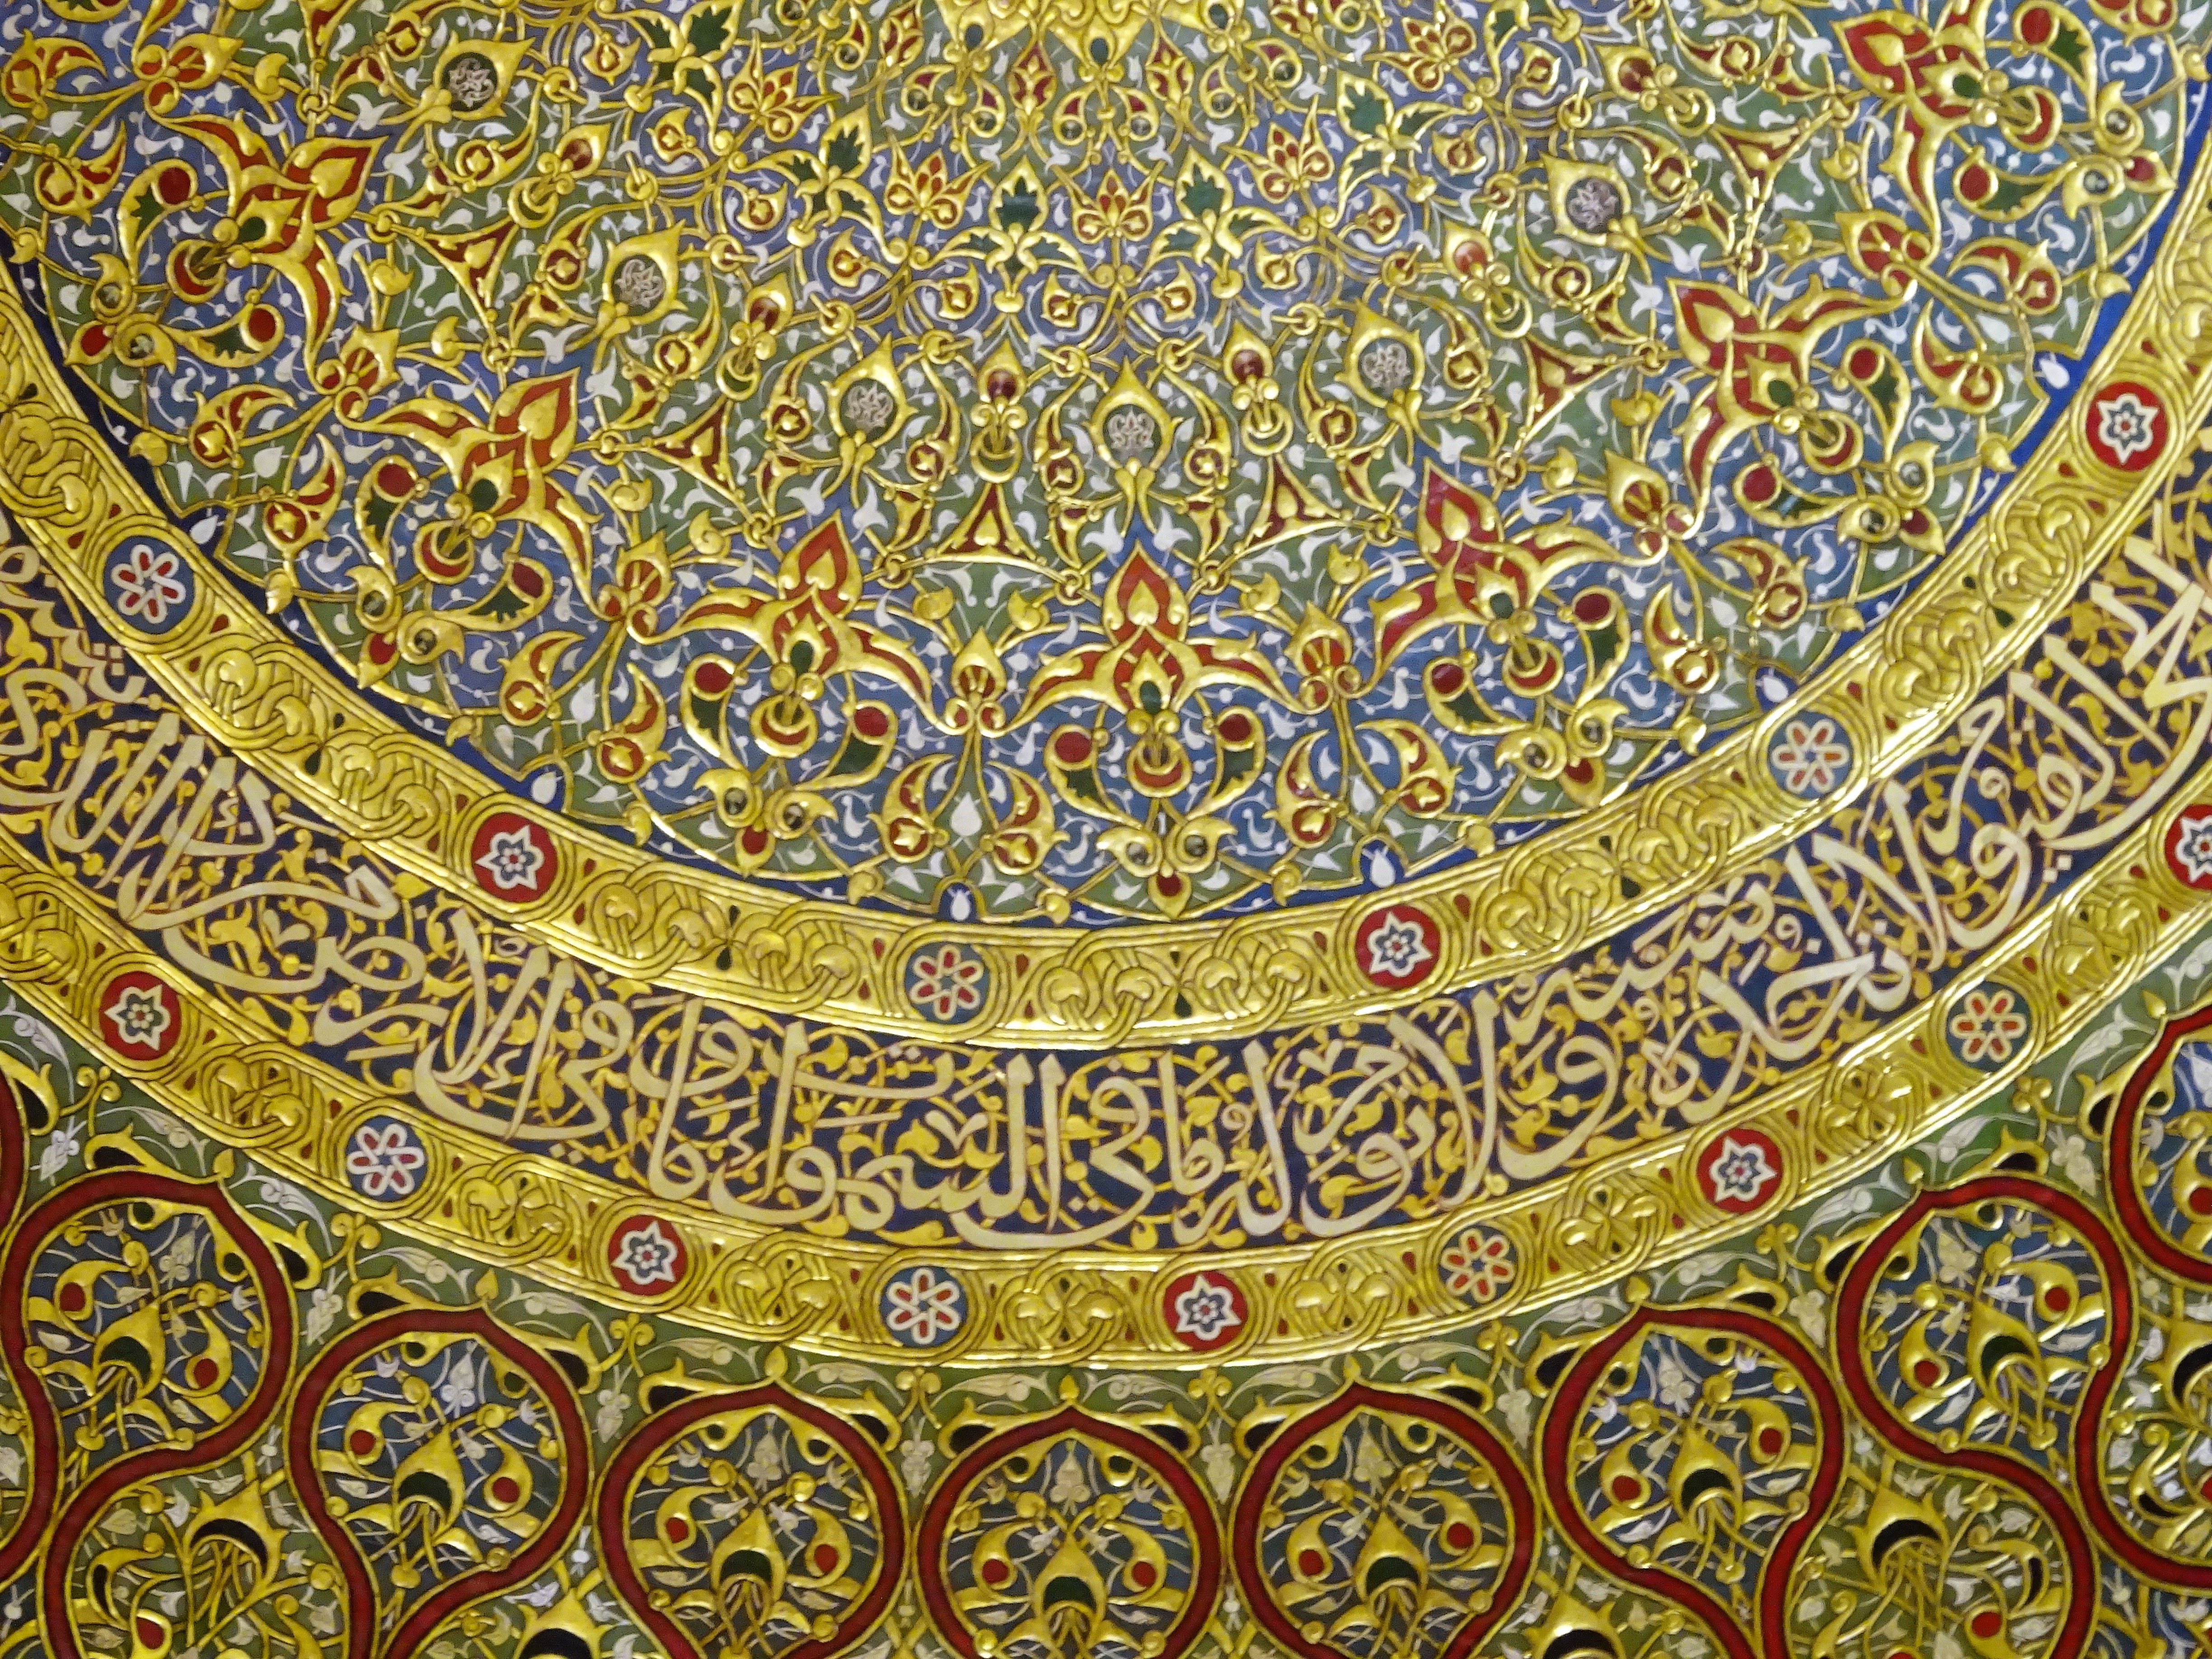 Datei Ornament And Writing At Dome Of The Dome Of The Rock